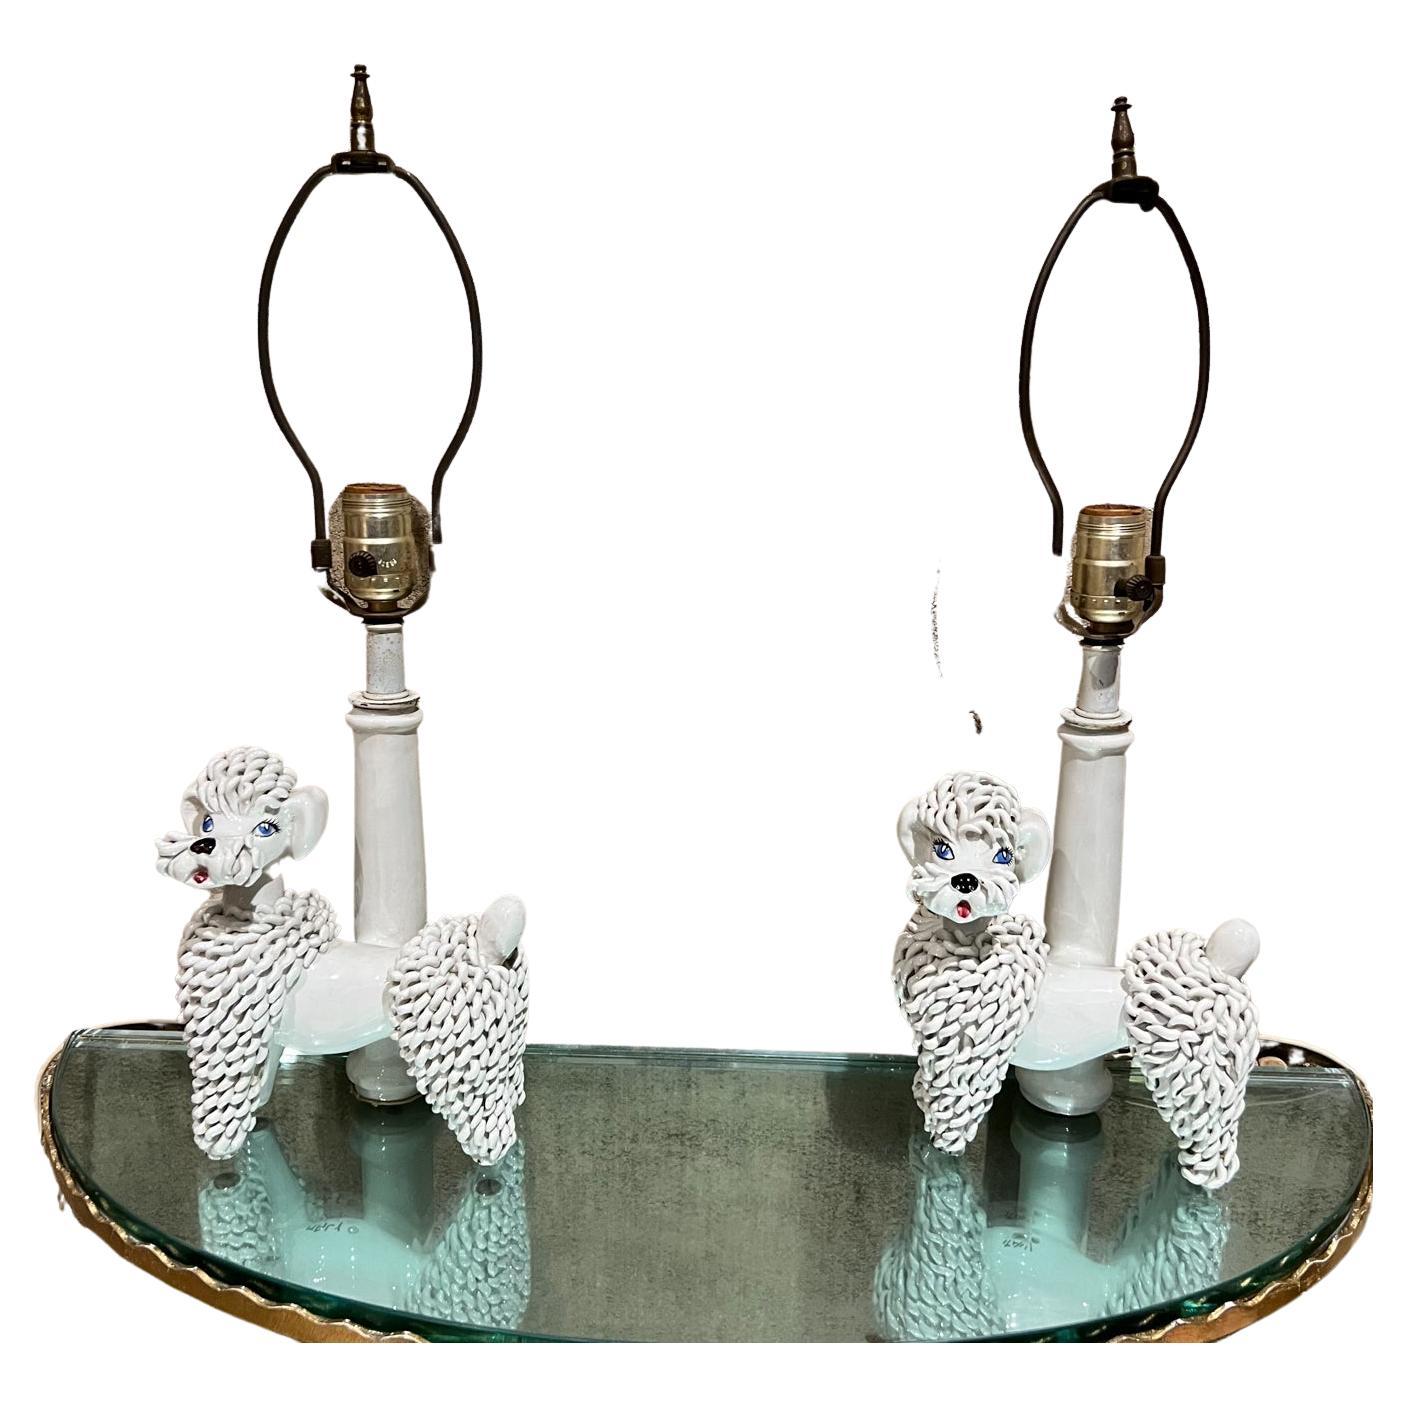 1950s table lamps Doggy from Italy
Style of Phyliss Morris Hollywood Regency Era
13 to socket 20.5 to finial x 7 w x 4 D
Pair of table lamps made in Italy, Poodle dogs with blue eyes.
Absolutely adorable!
No shade is included.
Lamps only.
Preowned